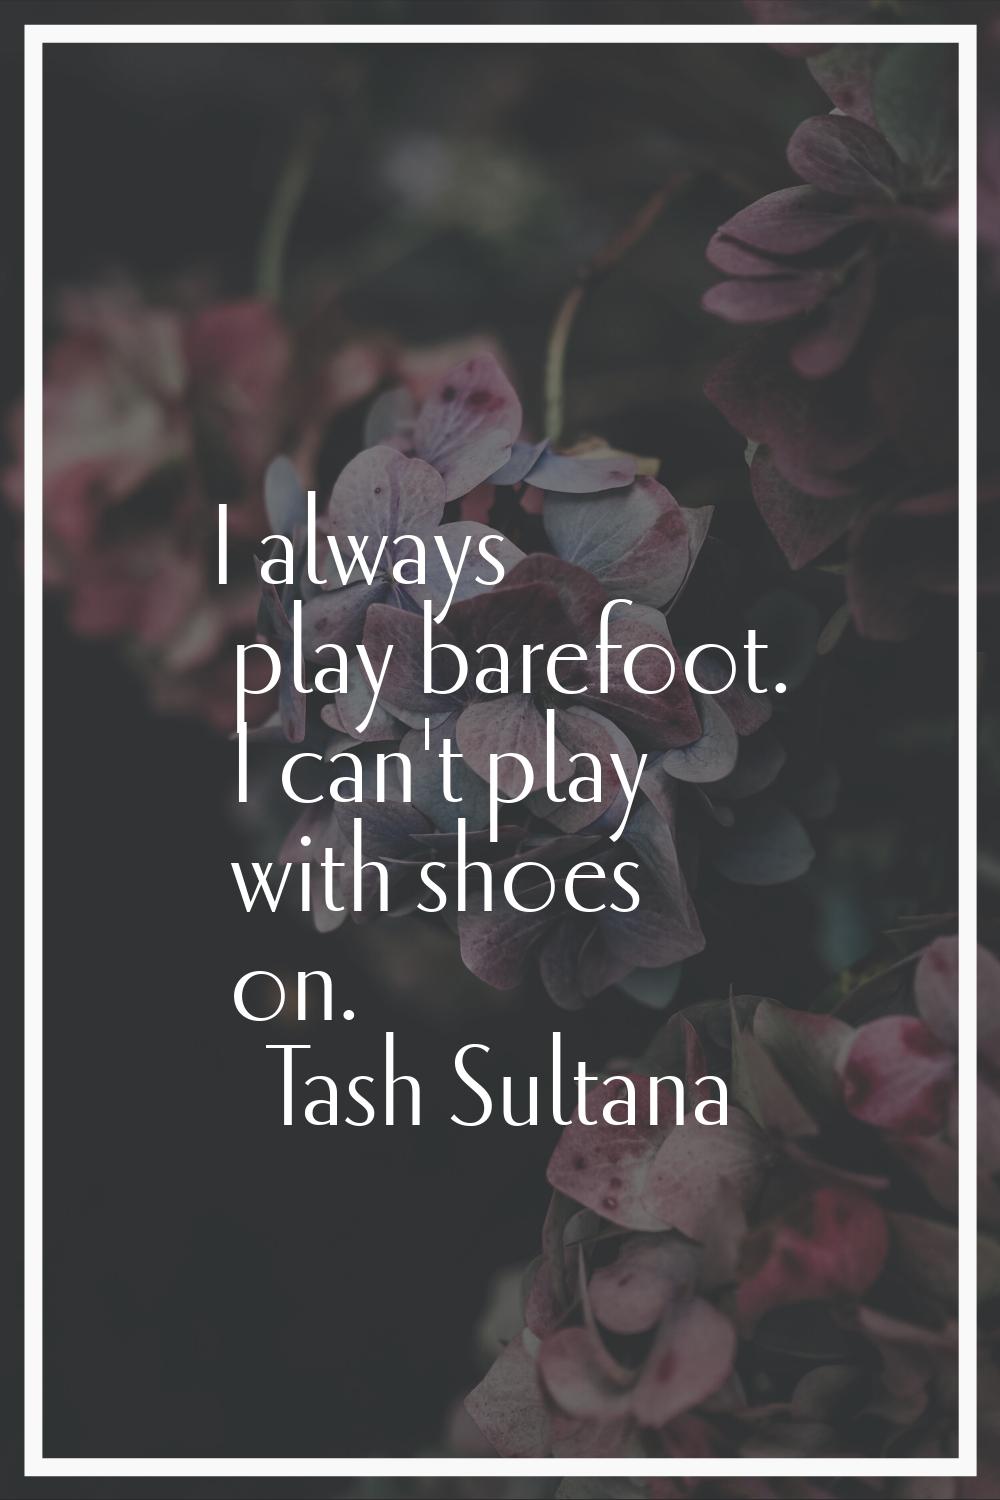 I always play barefoot. I can't play with shoes on.